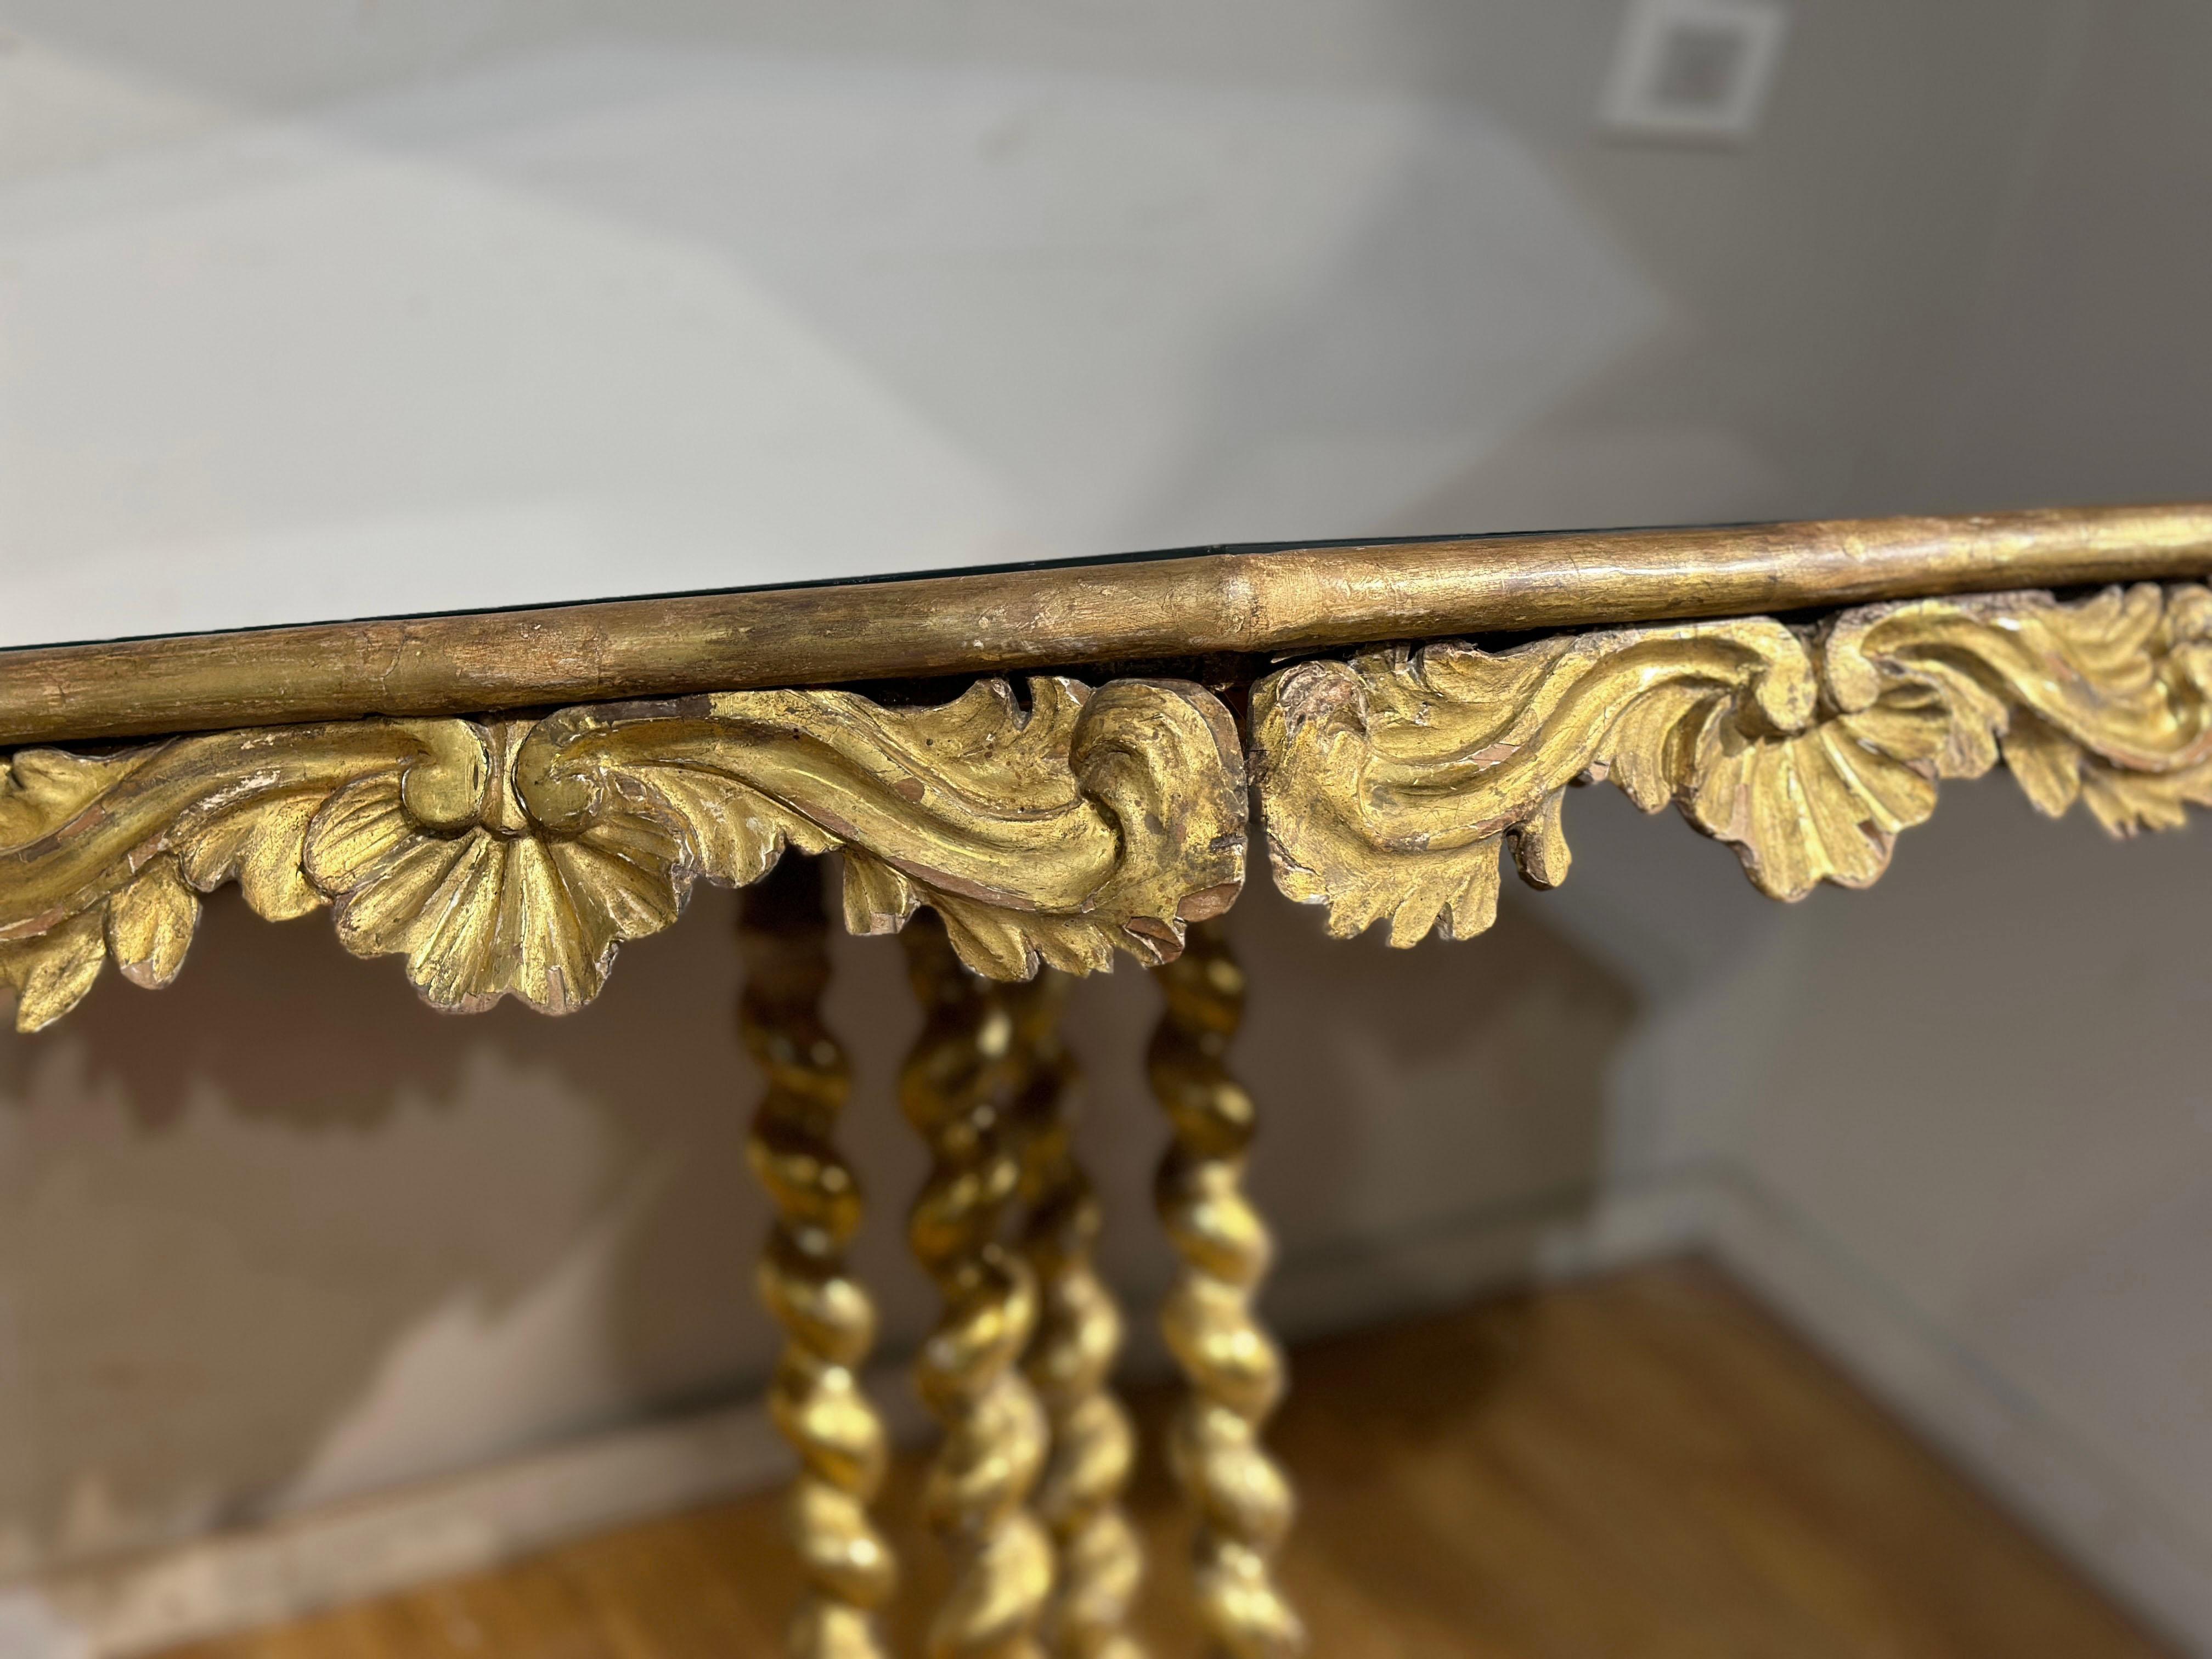 EARLY 19th CENTURY GILDED WOOD TABLE WITH SIMILAR MALACHITE FABRIC (Kristall) im Angebot